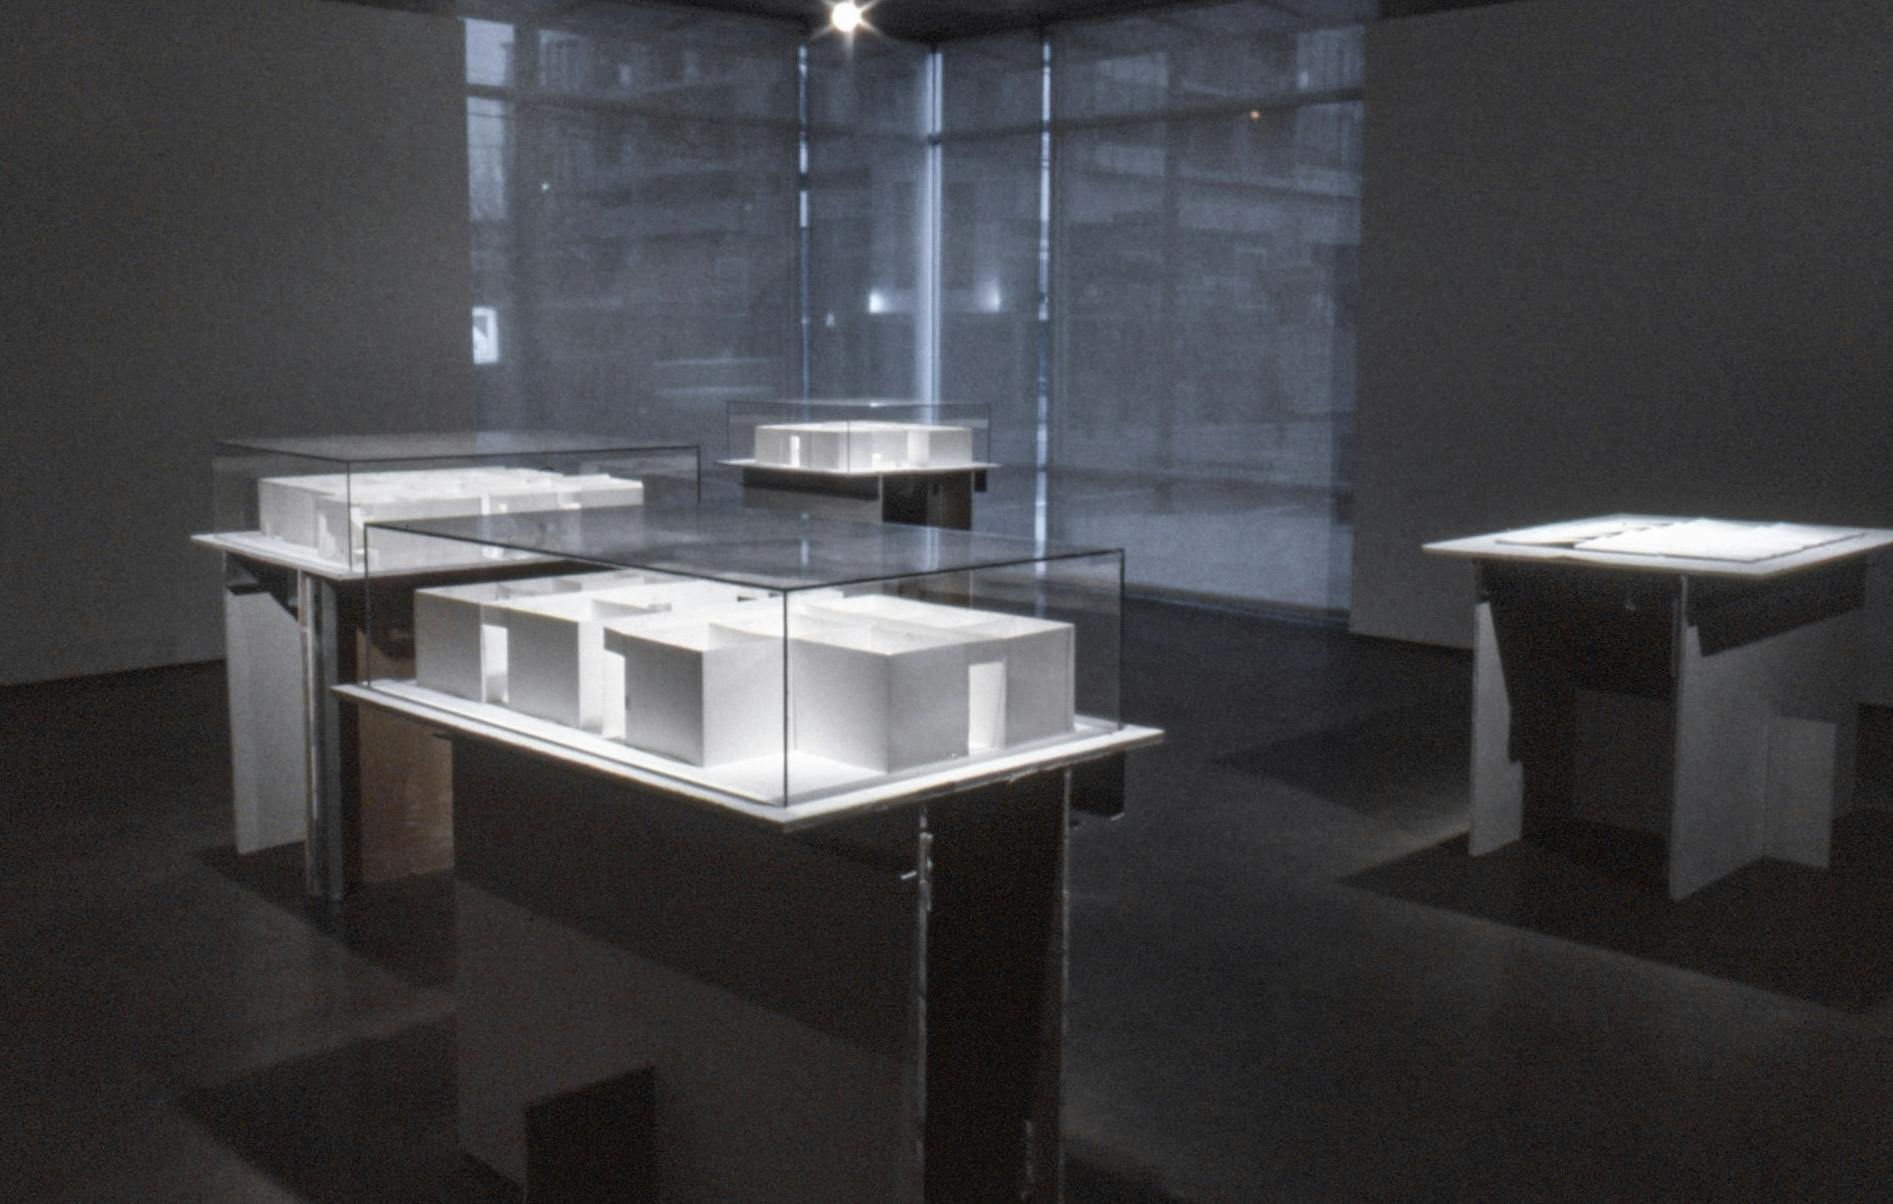 White sculptures are installed in a gallery space. Each sculpture displays a mockup of an architecture complex. They are placed on pedestals made of the cutout parts of the gallery wall. 